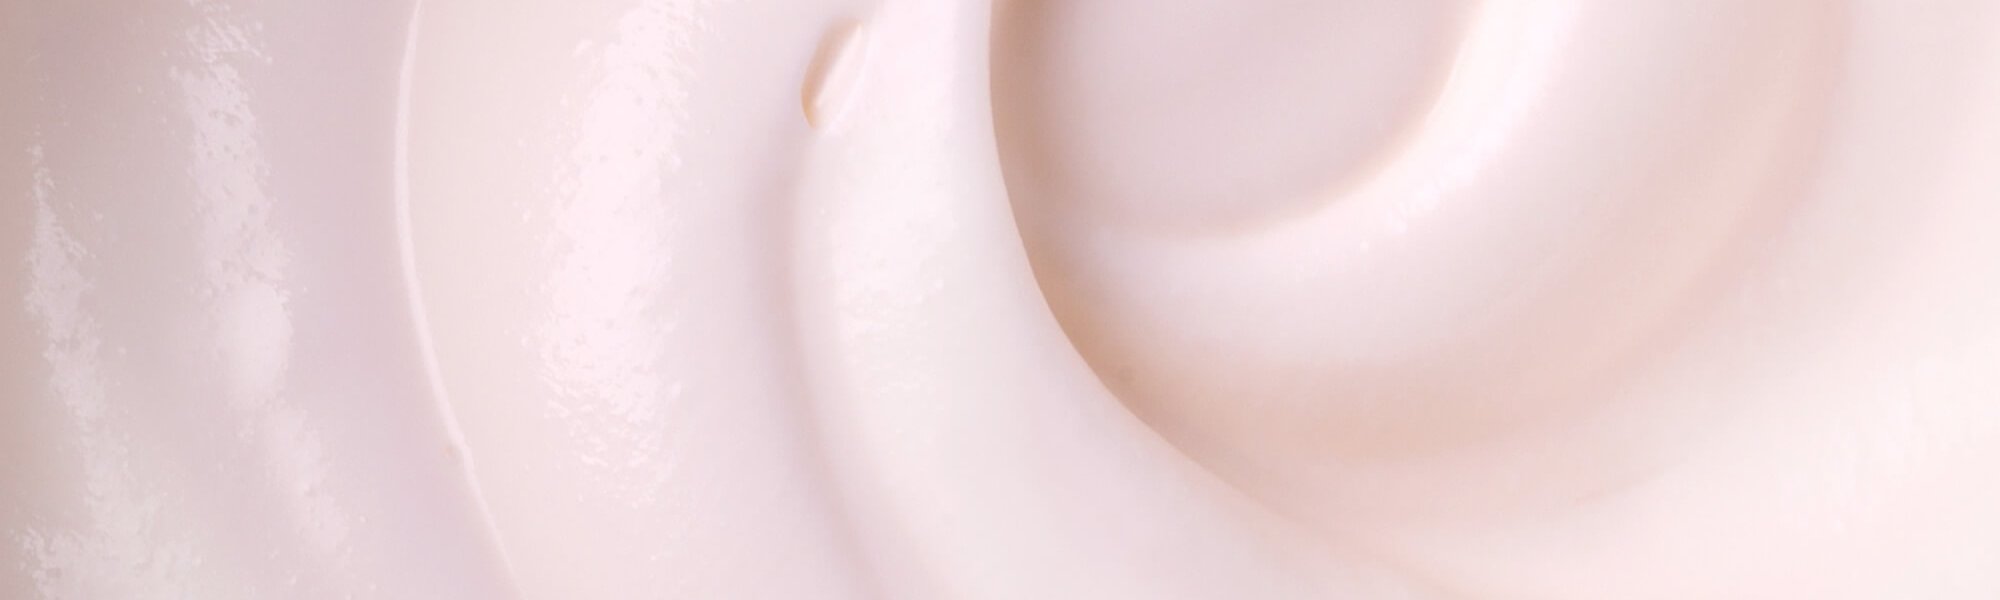 We Are Melting For Transforming Texture Skin Care Skin Care Trend Article